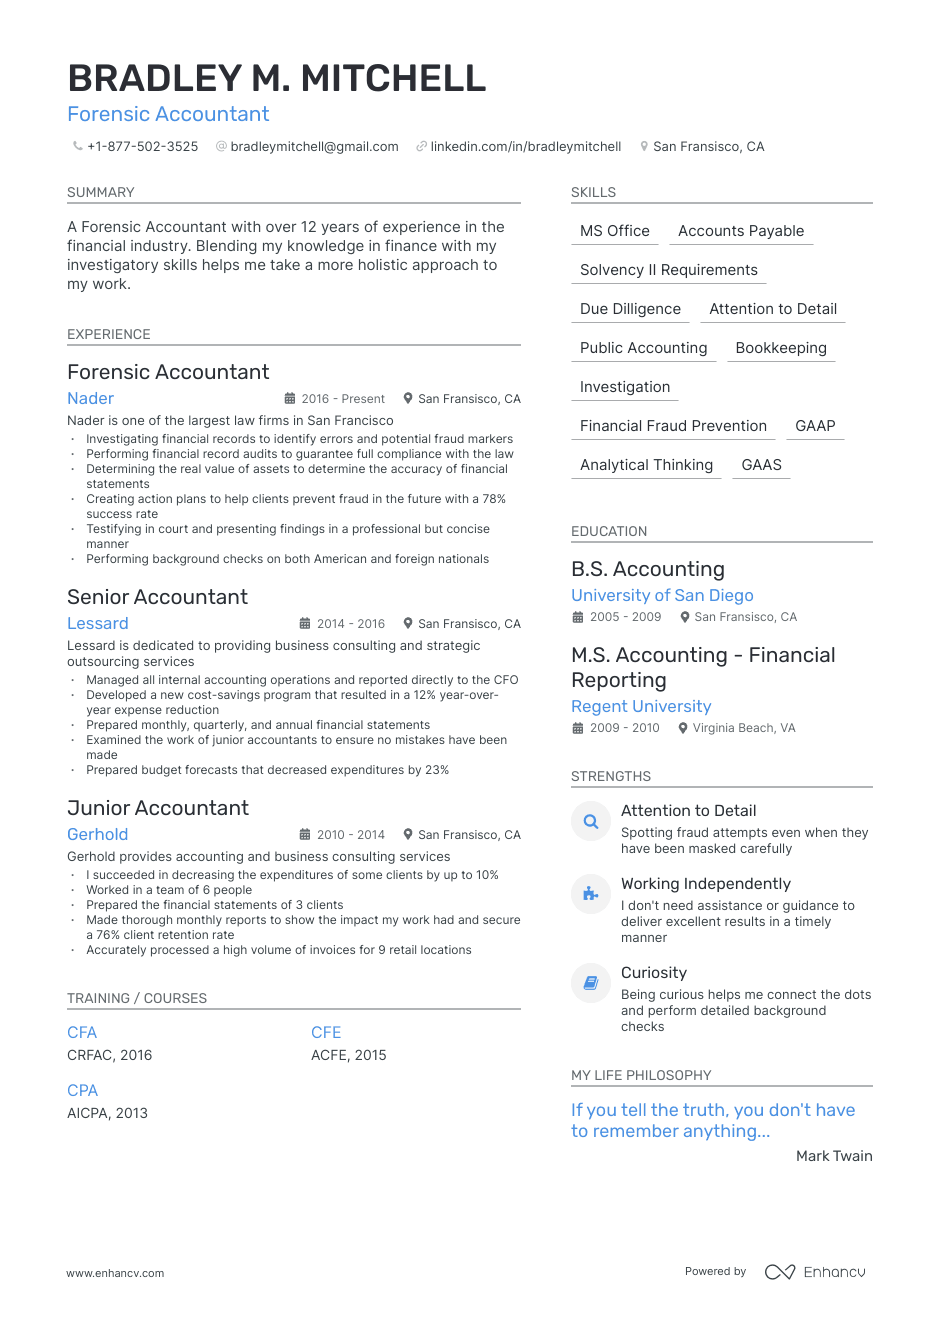 Forensic accountant resume example